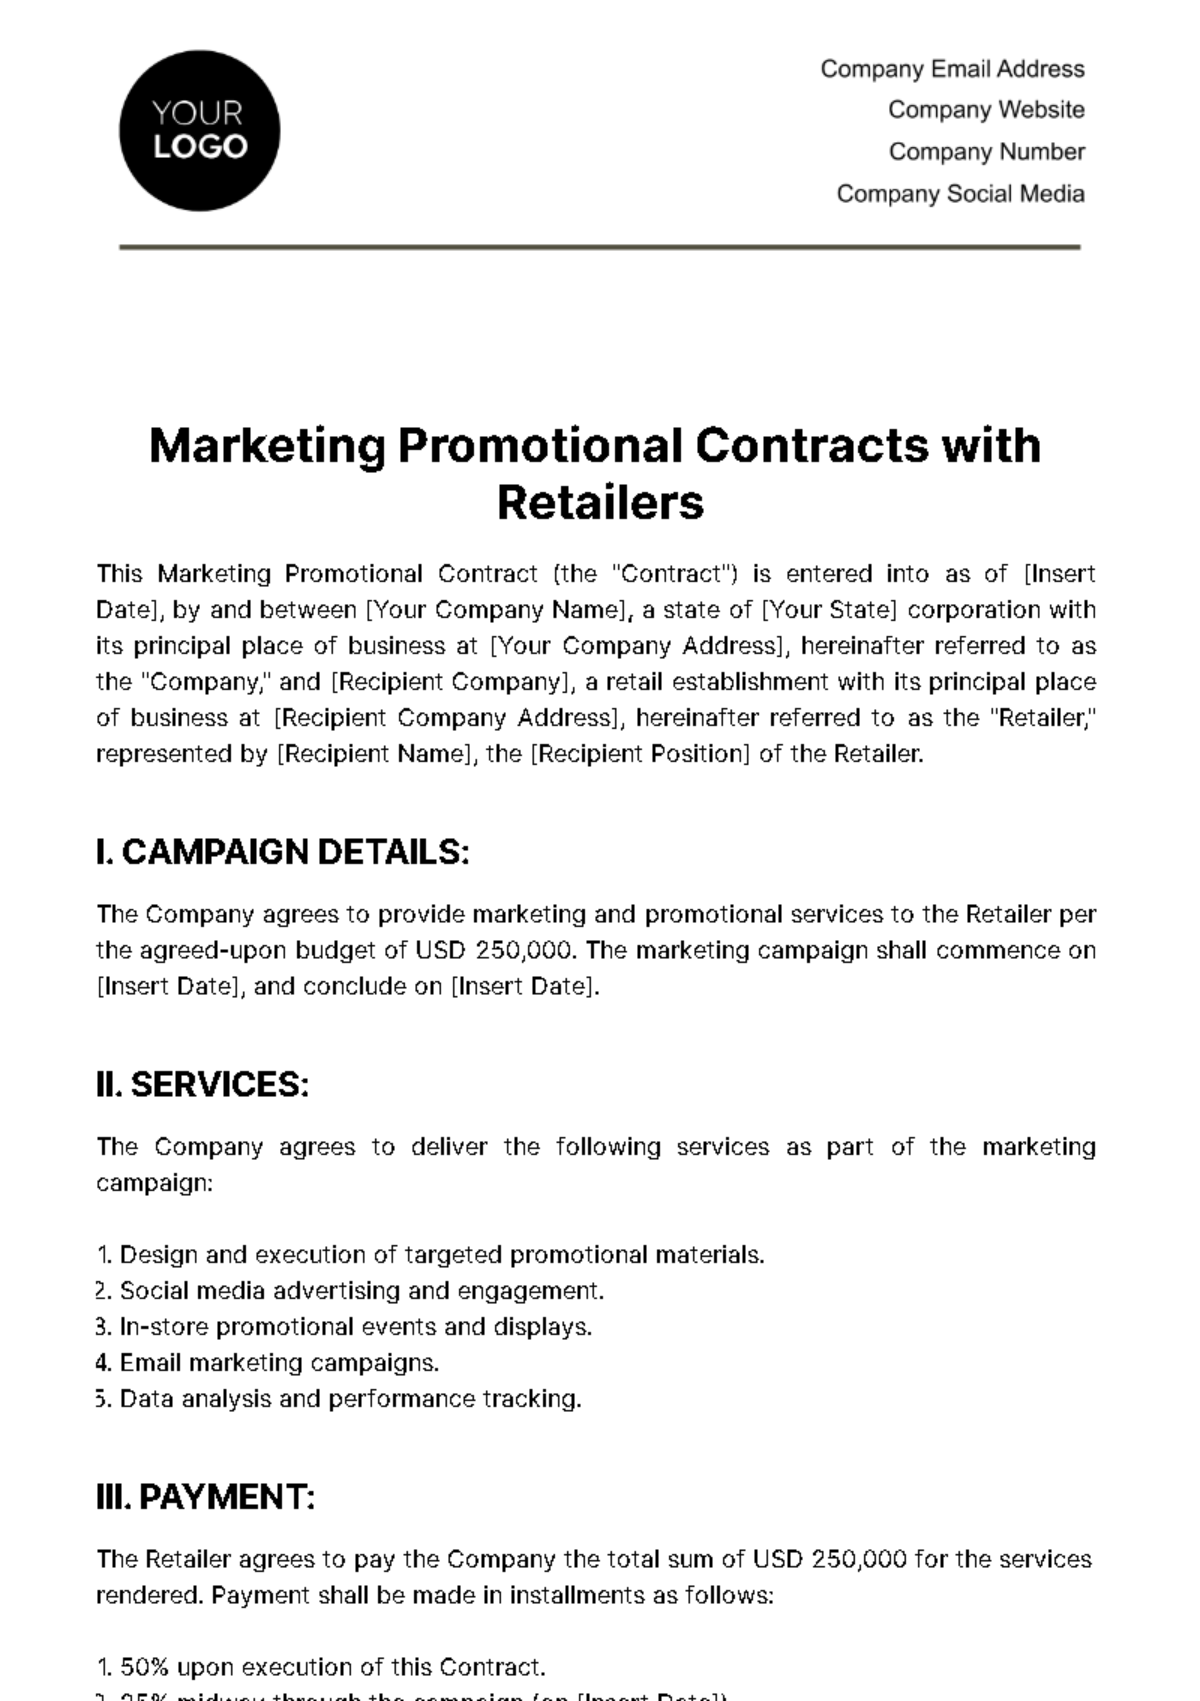 Free Marketing Promotional Contract with Retailers Template